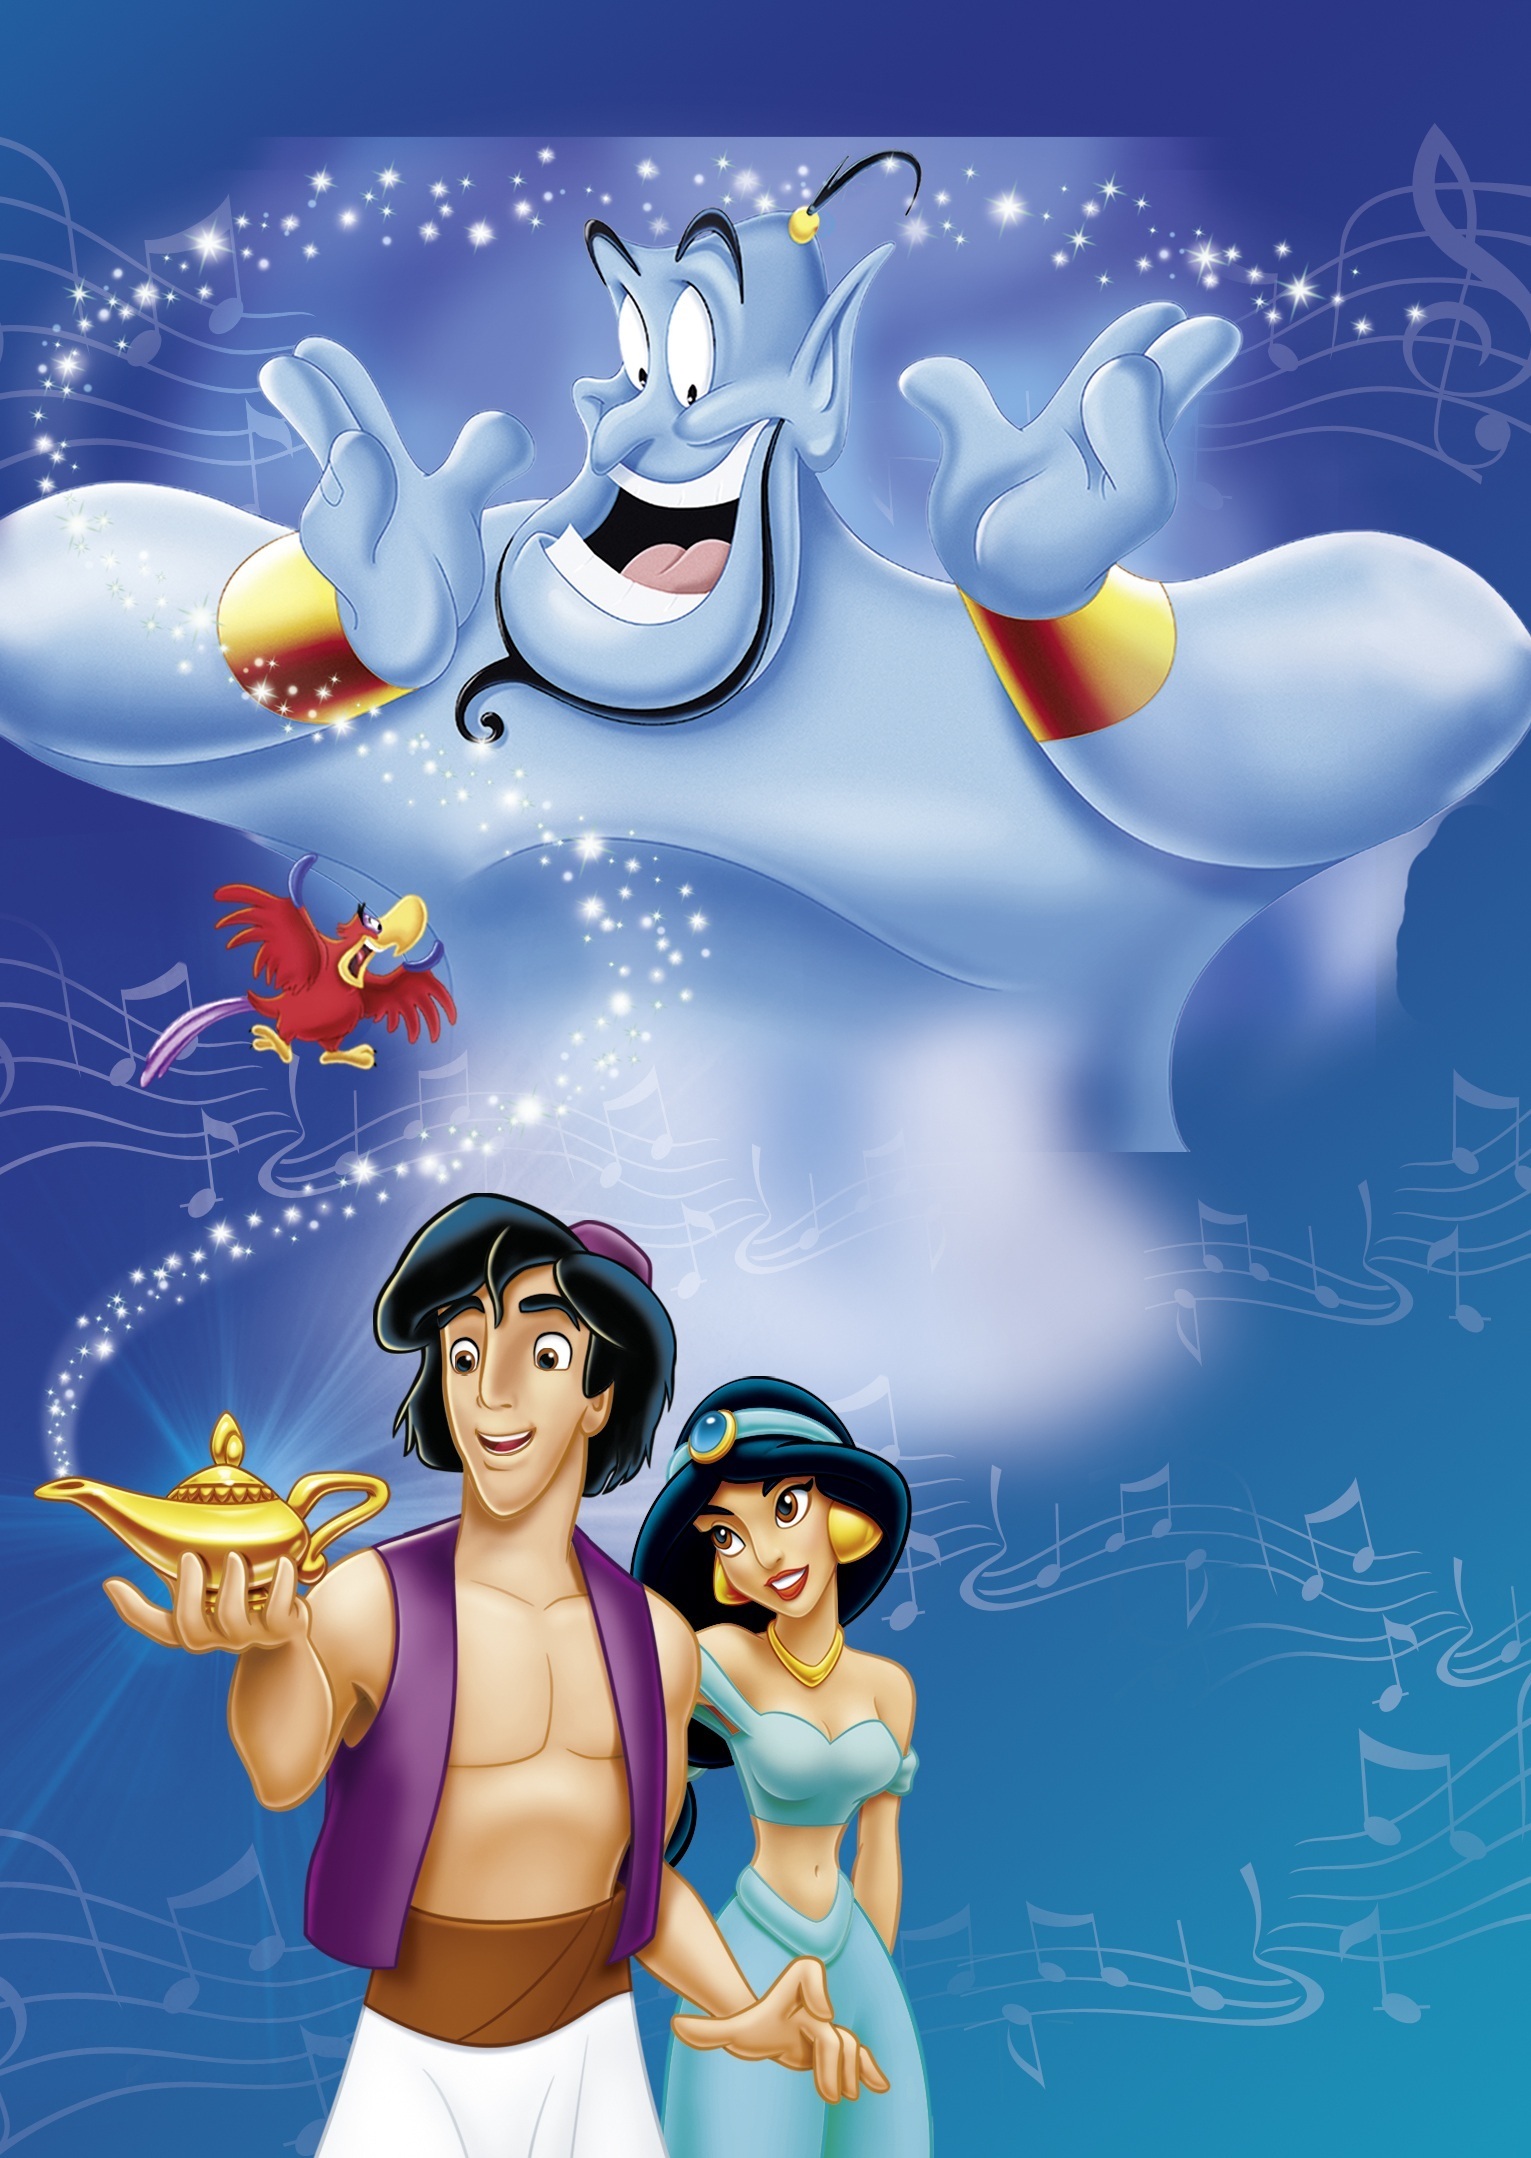 Aladdin for ios download free